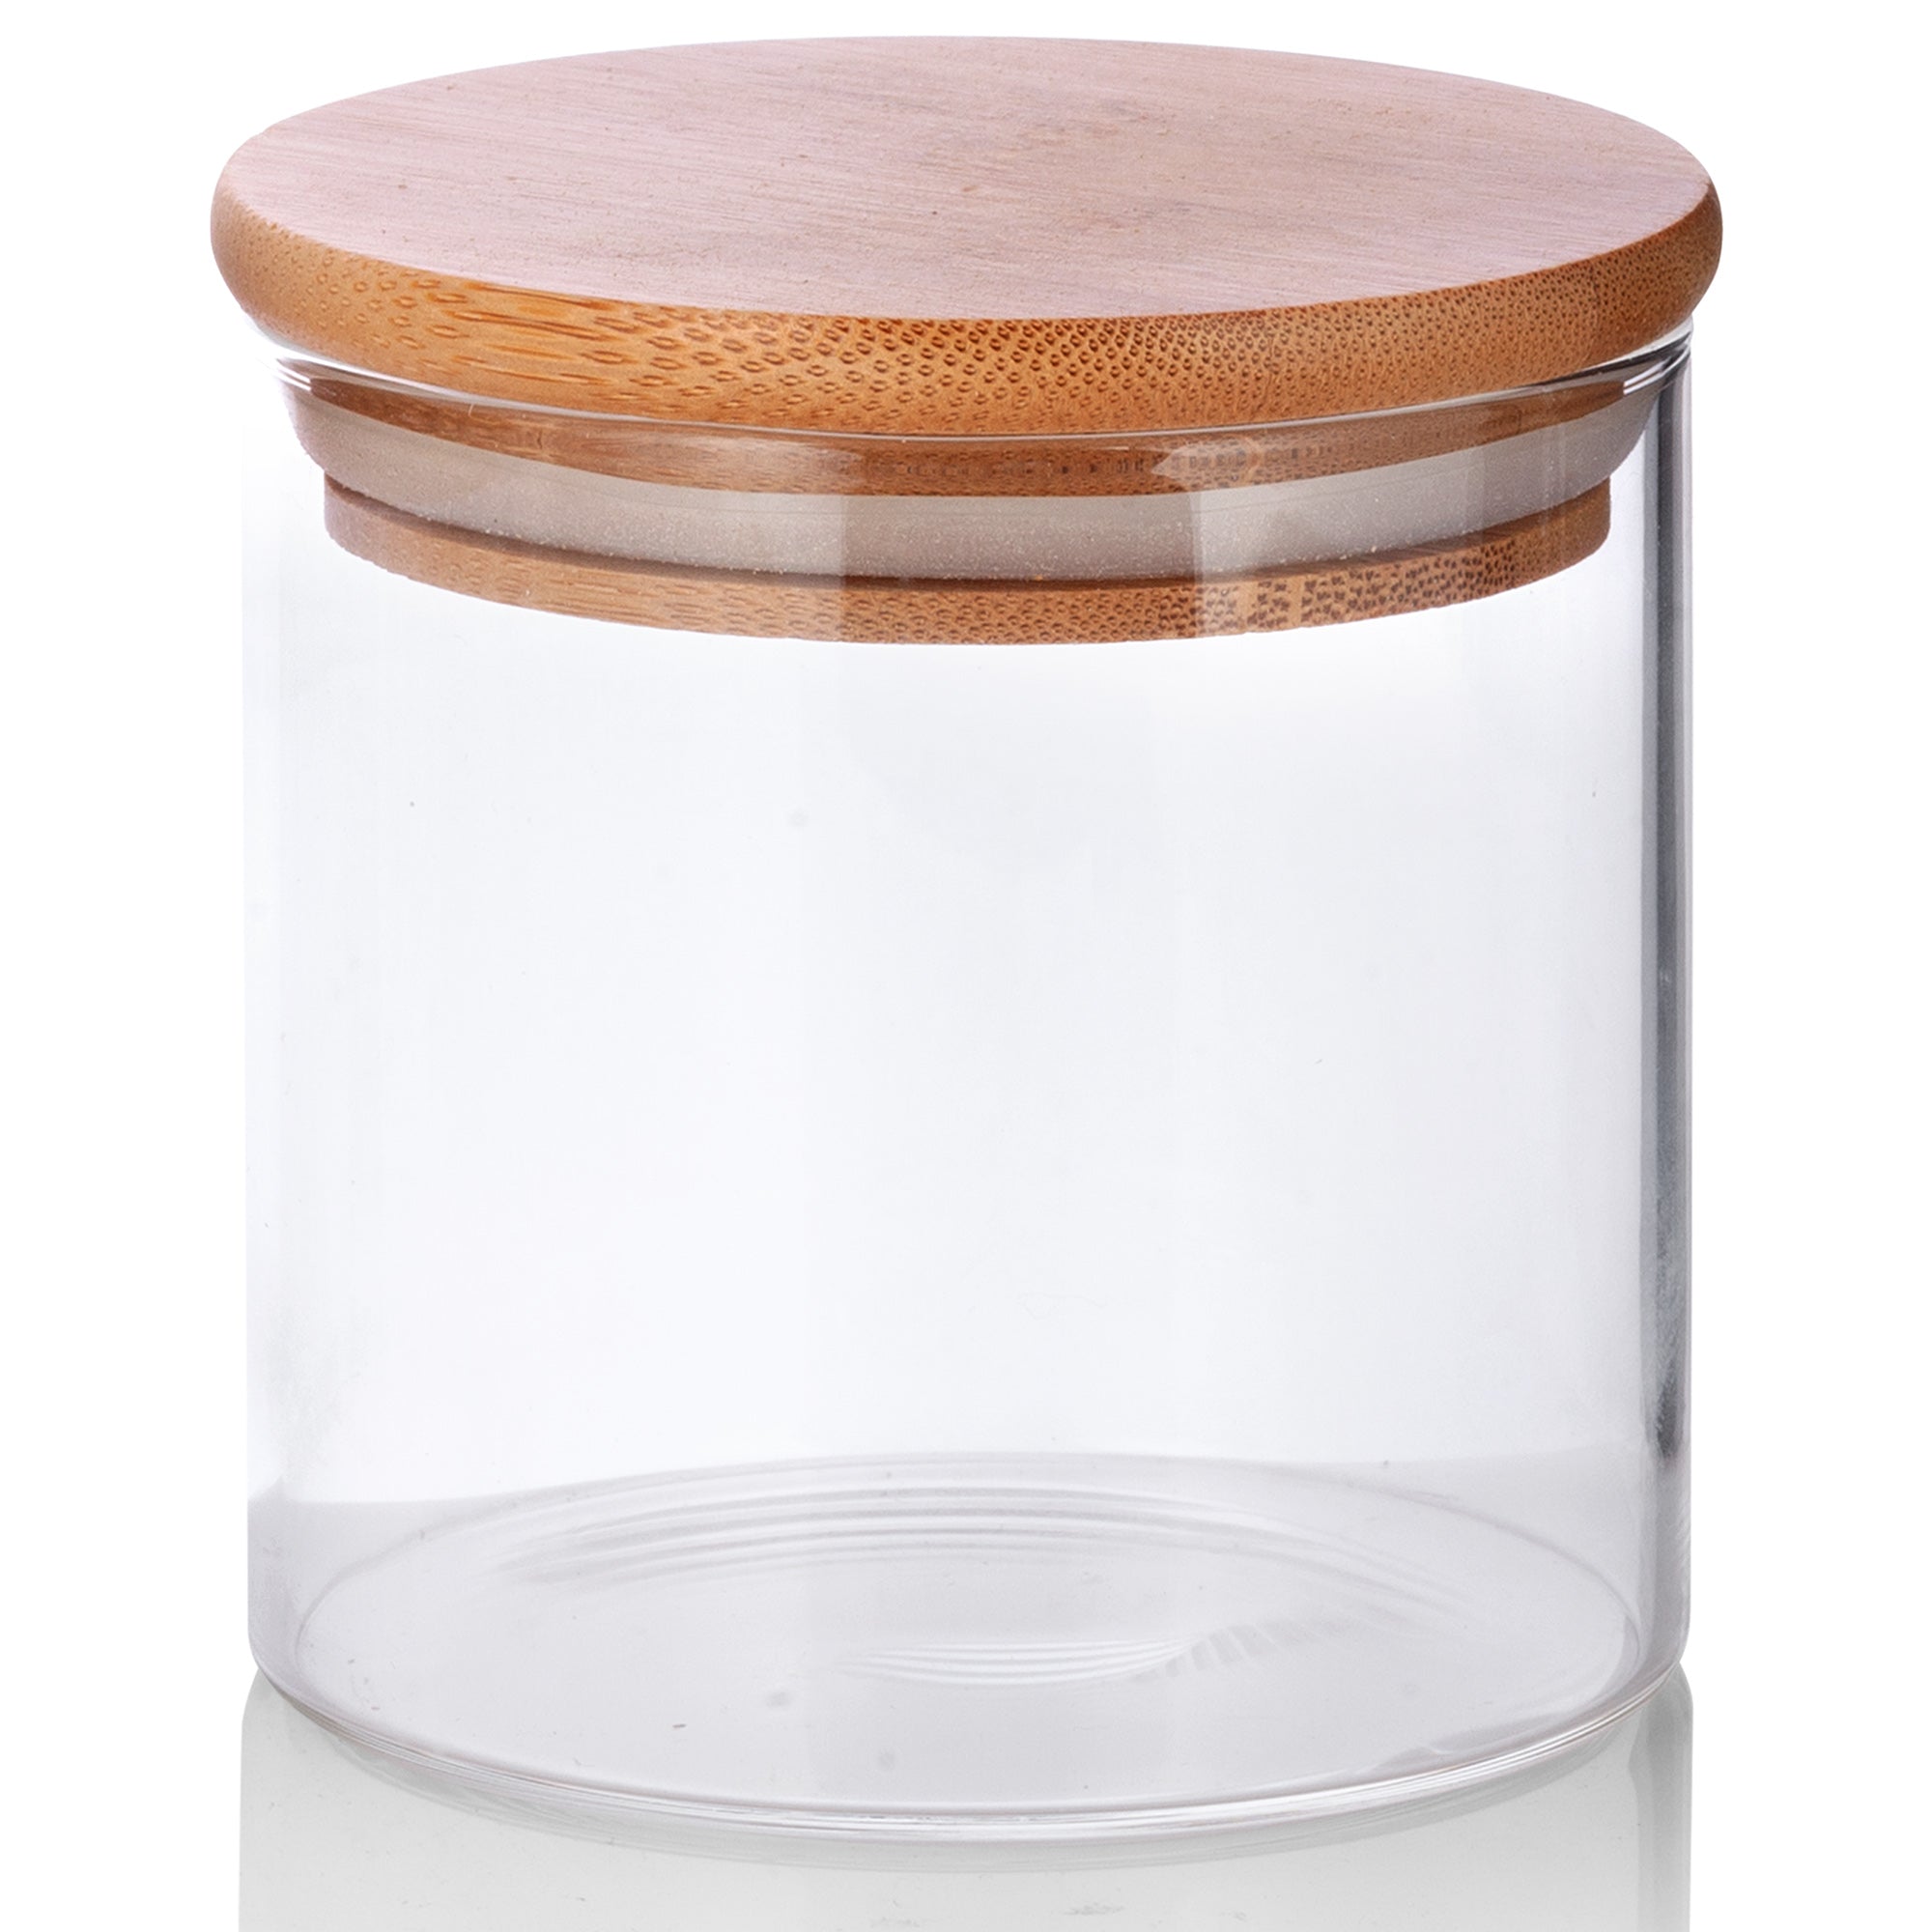 4-Cup Round Glass Storage Container with Bamboo Lid + Reviews